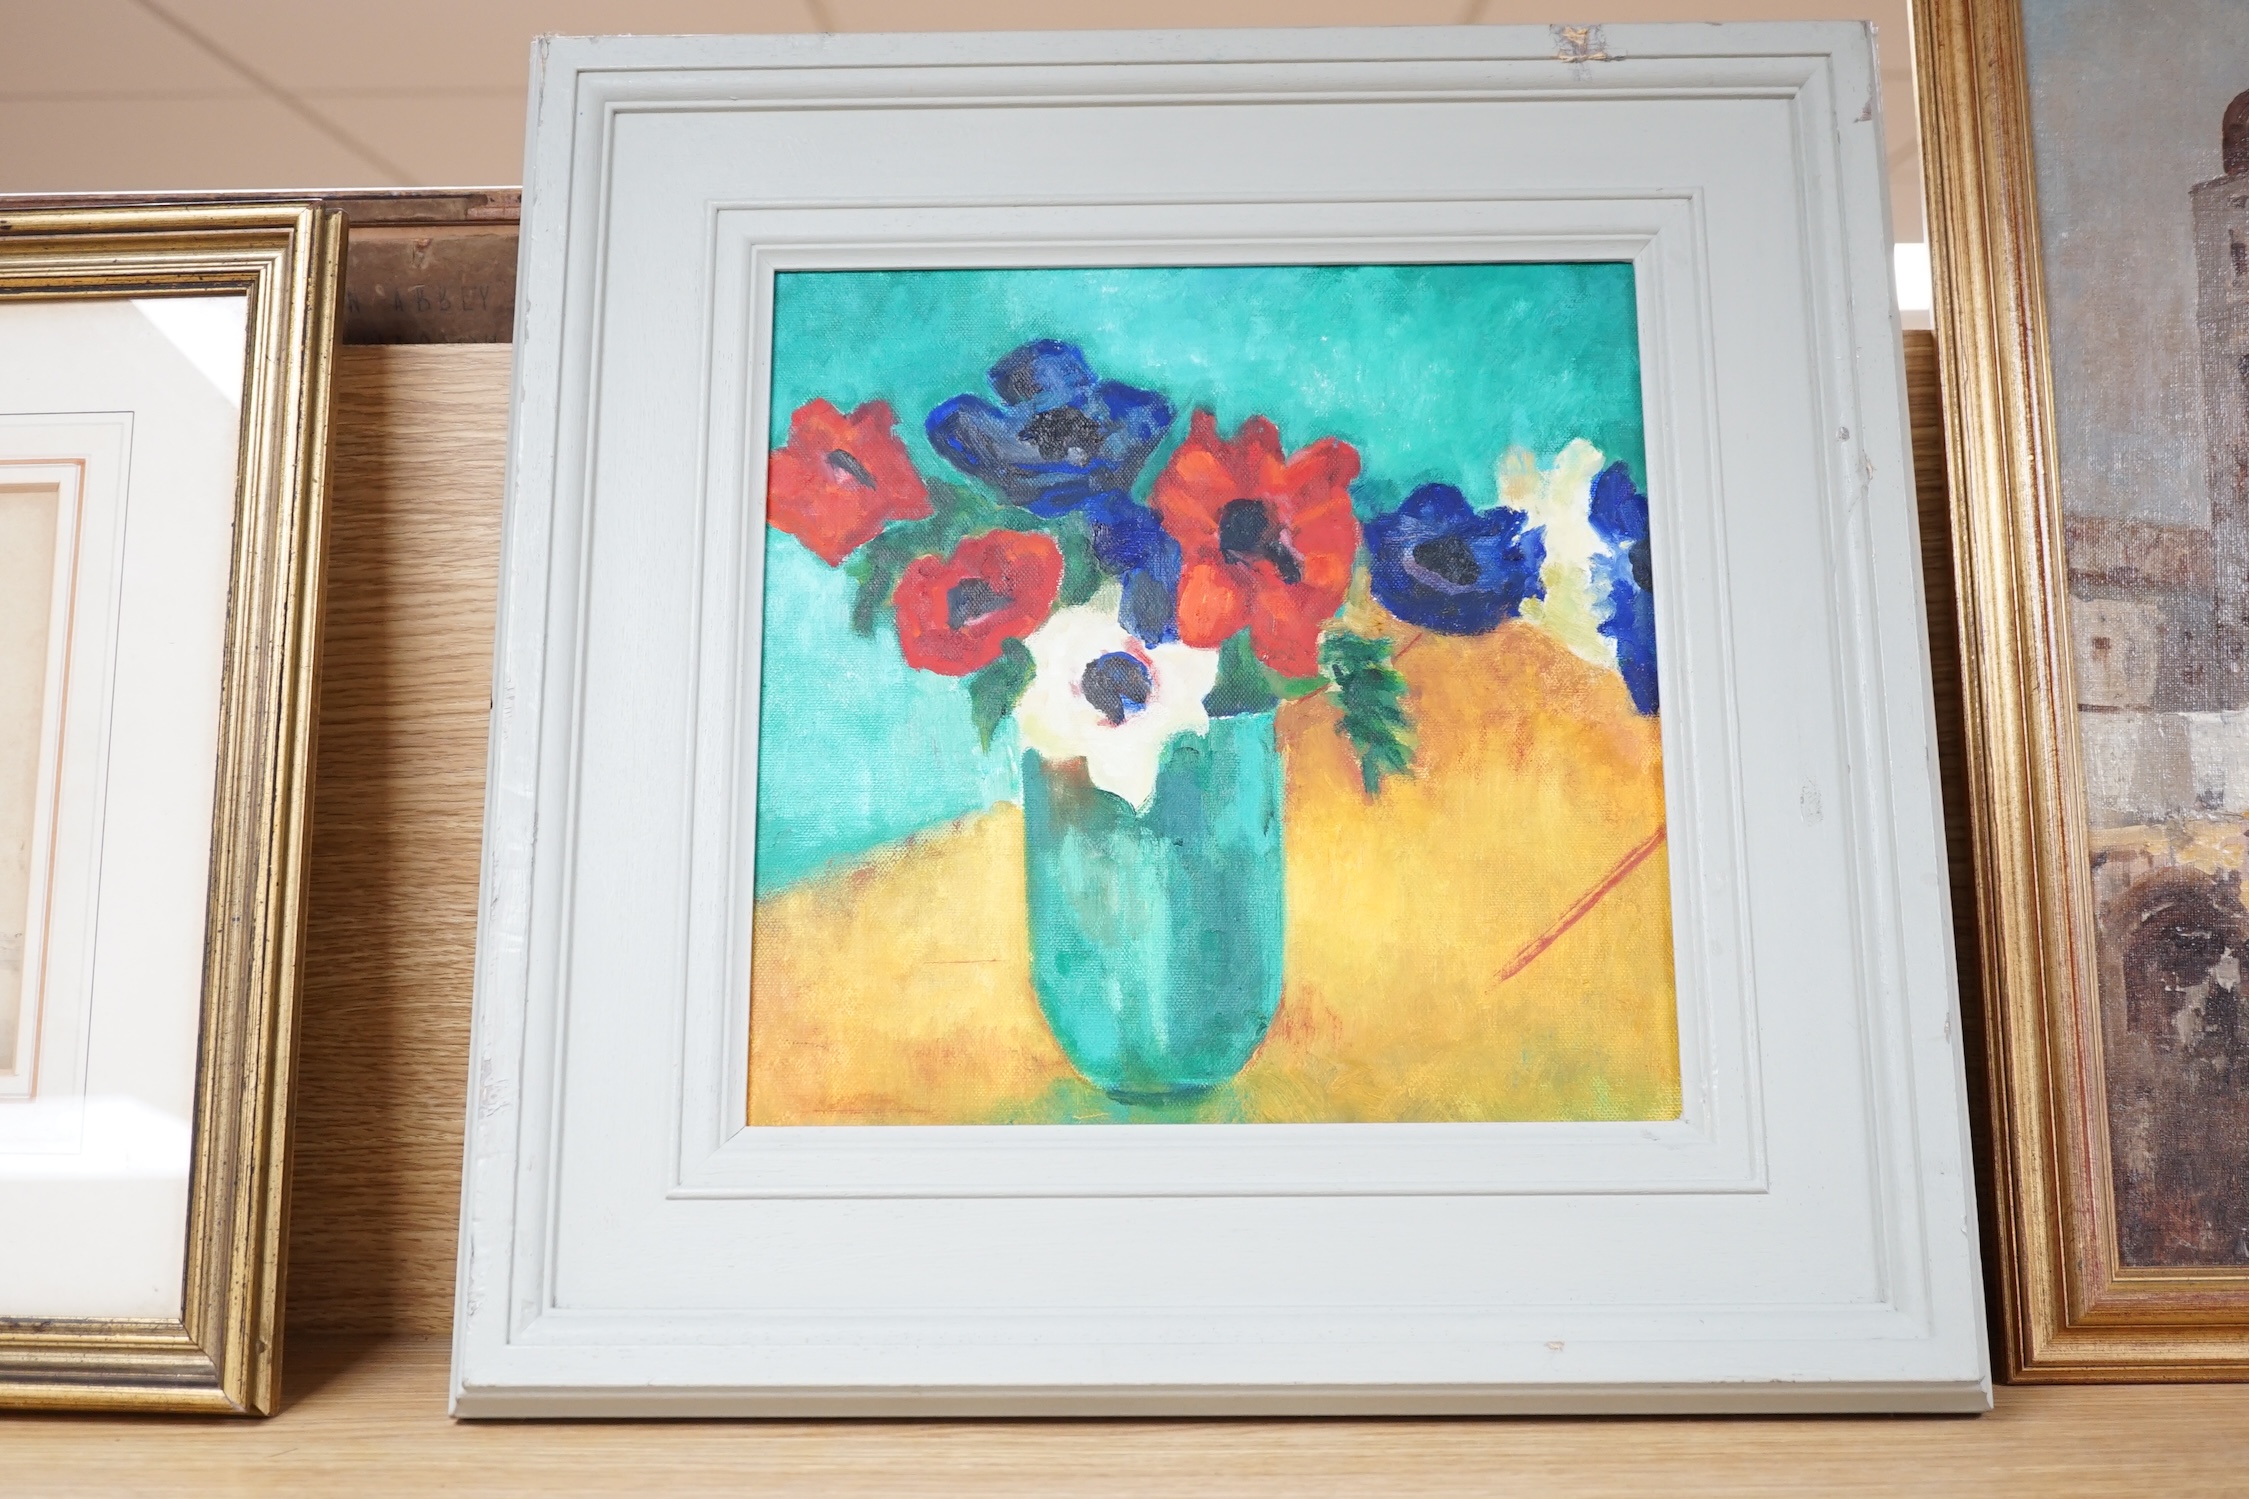 Gill Speirs, oil on canvas, ‘Anemones’, signed and dated ‘16 verso, The Chelsea Art Society label verso, 28 x 28cm. Condition - good, damage to the frame